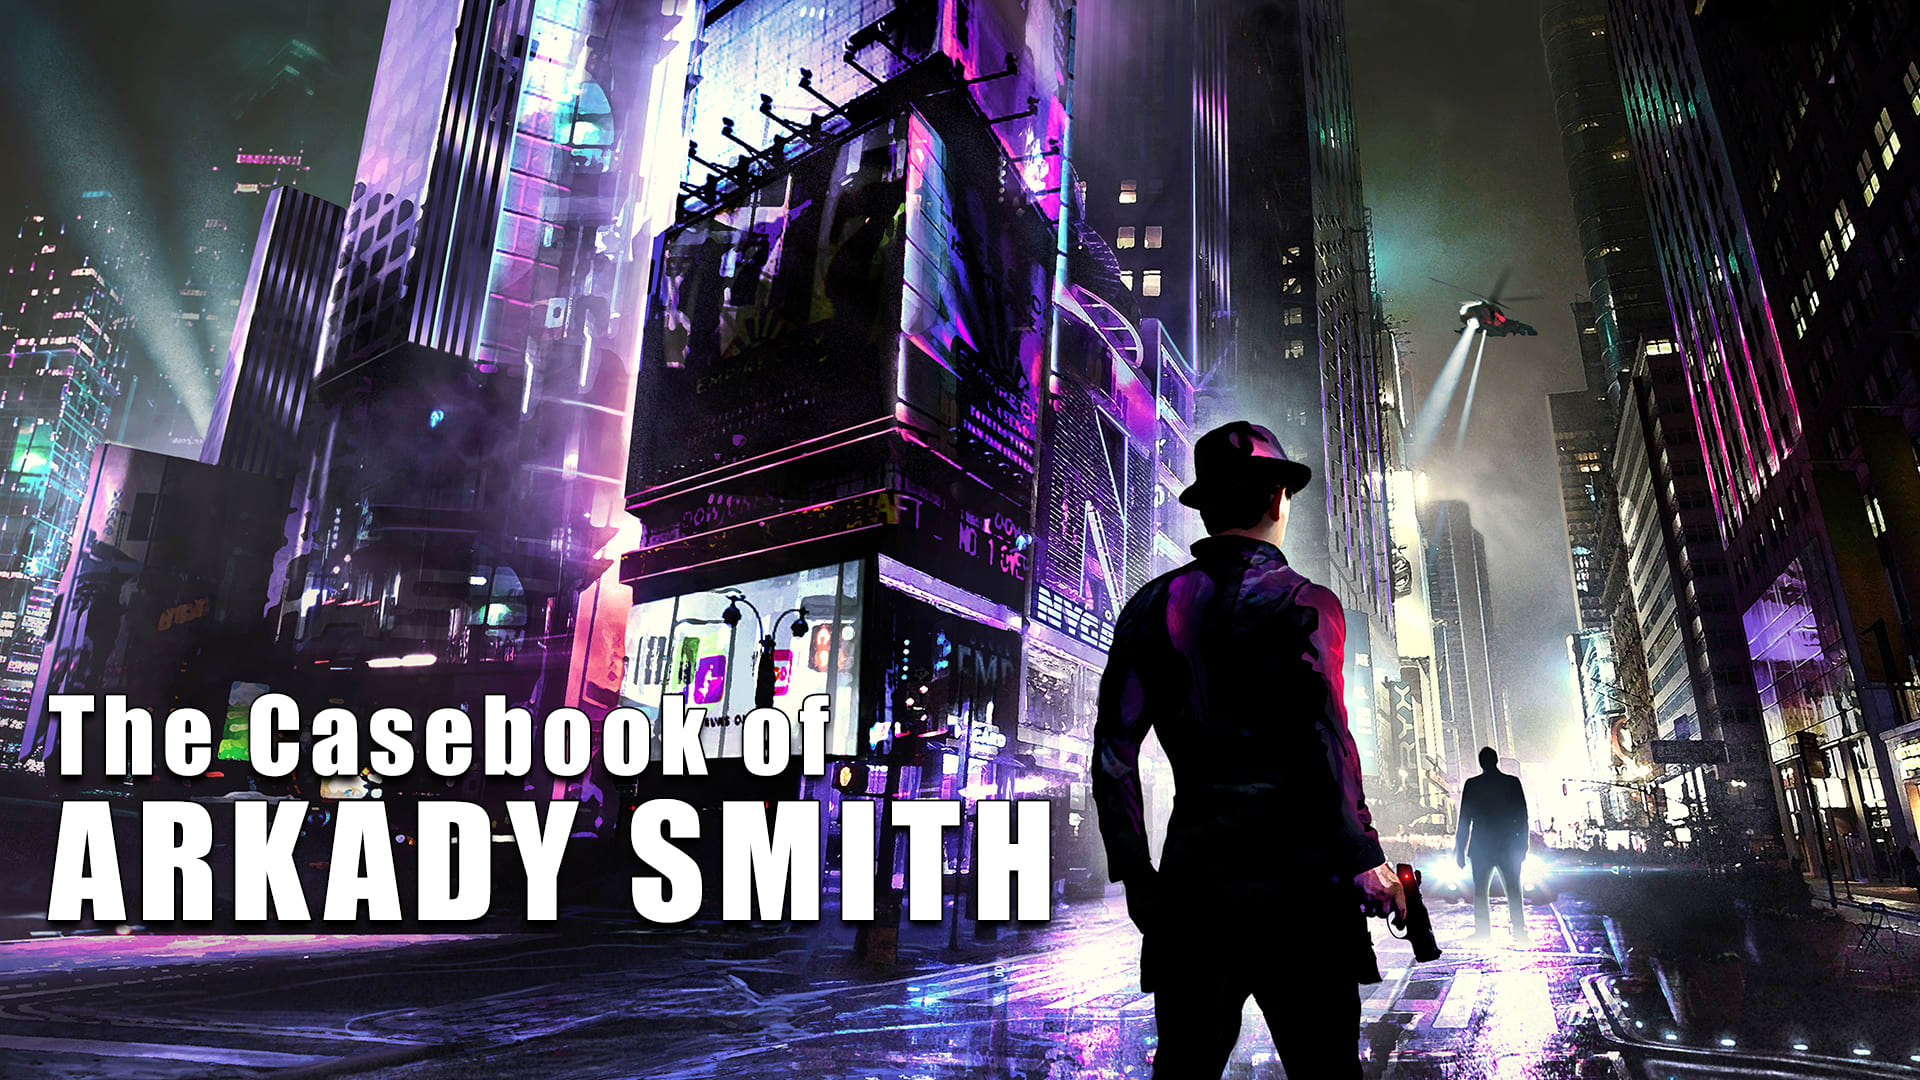 The Casebook of Arkady Smith